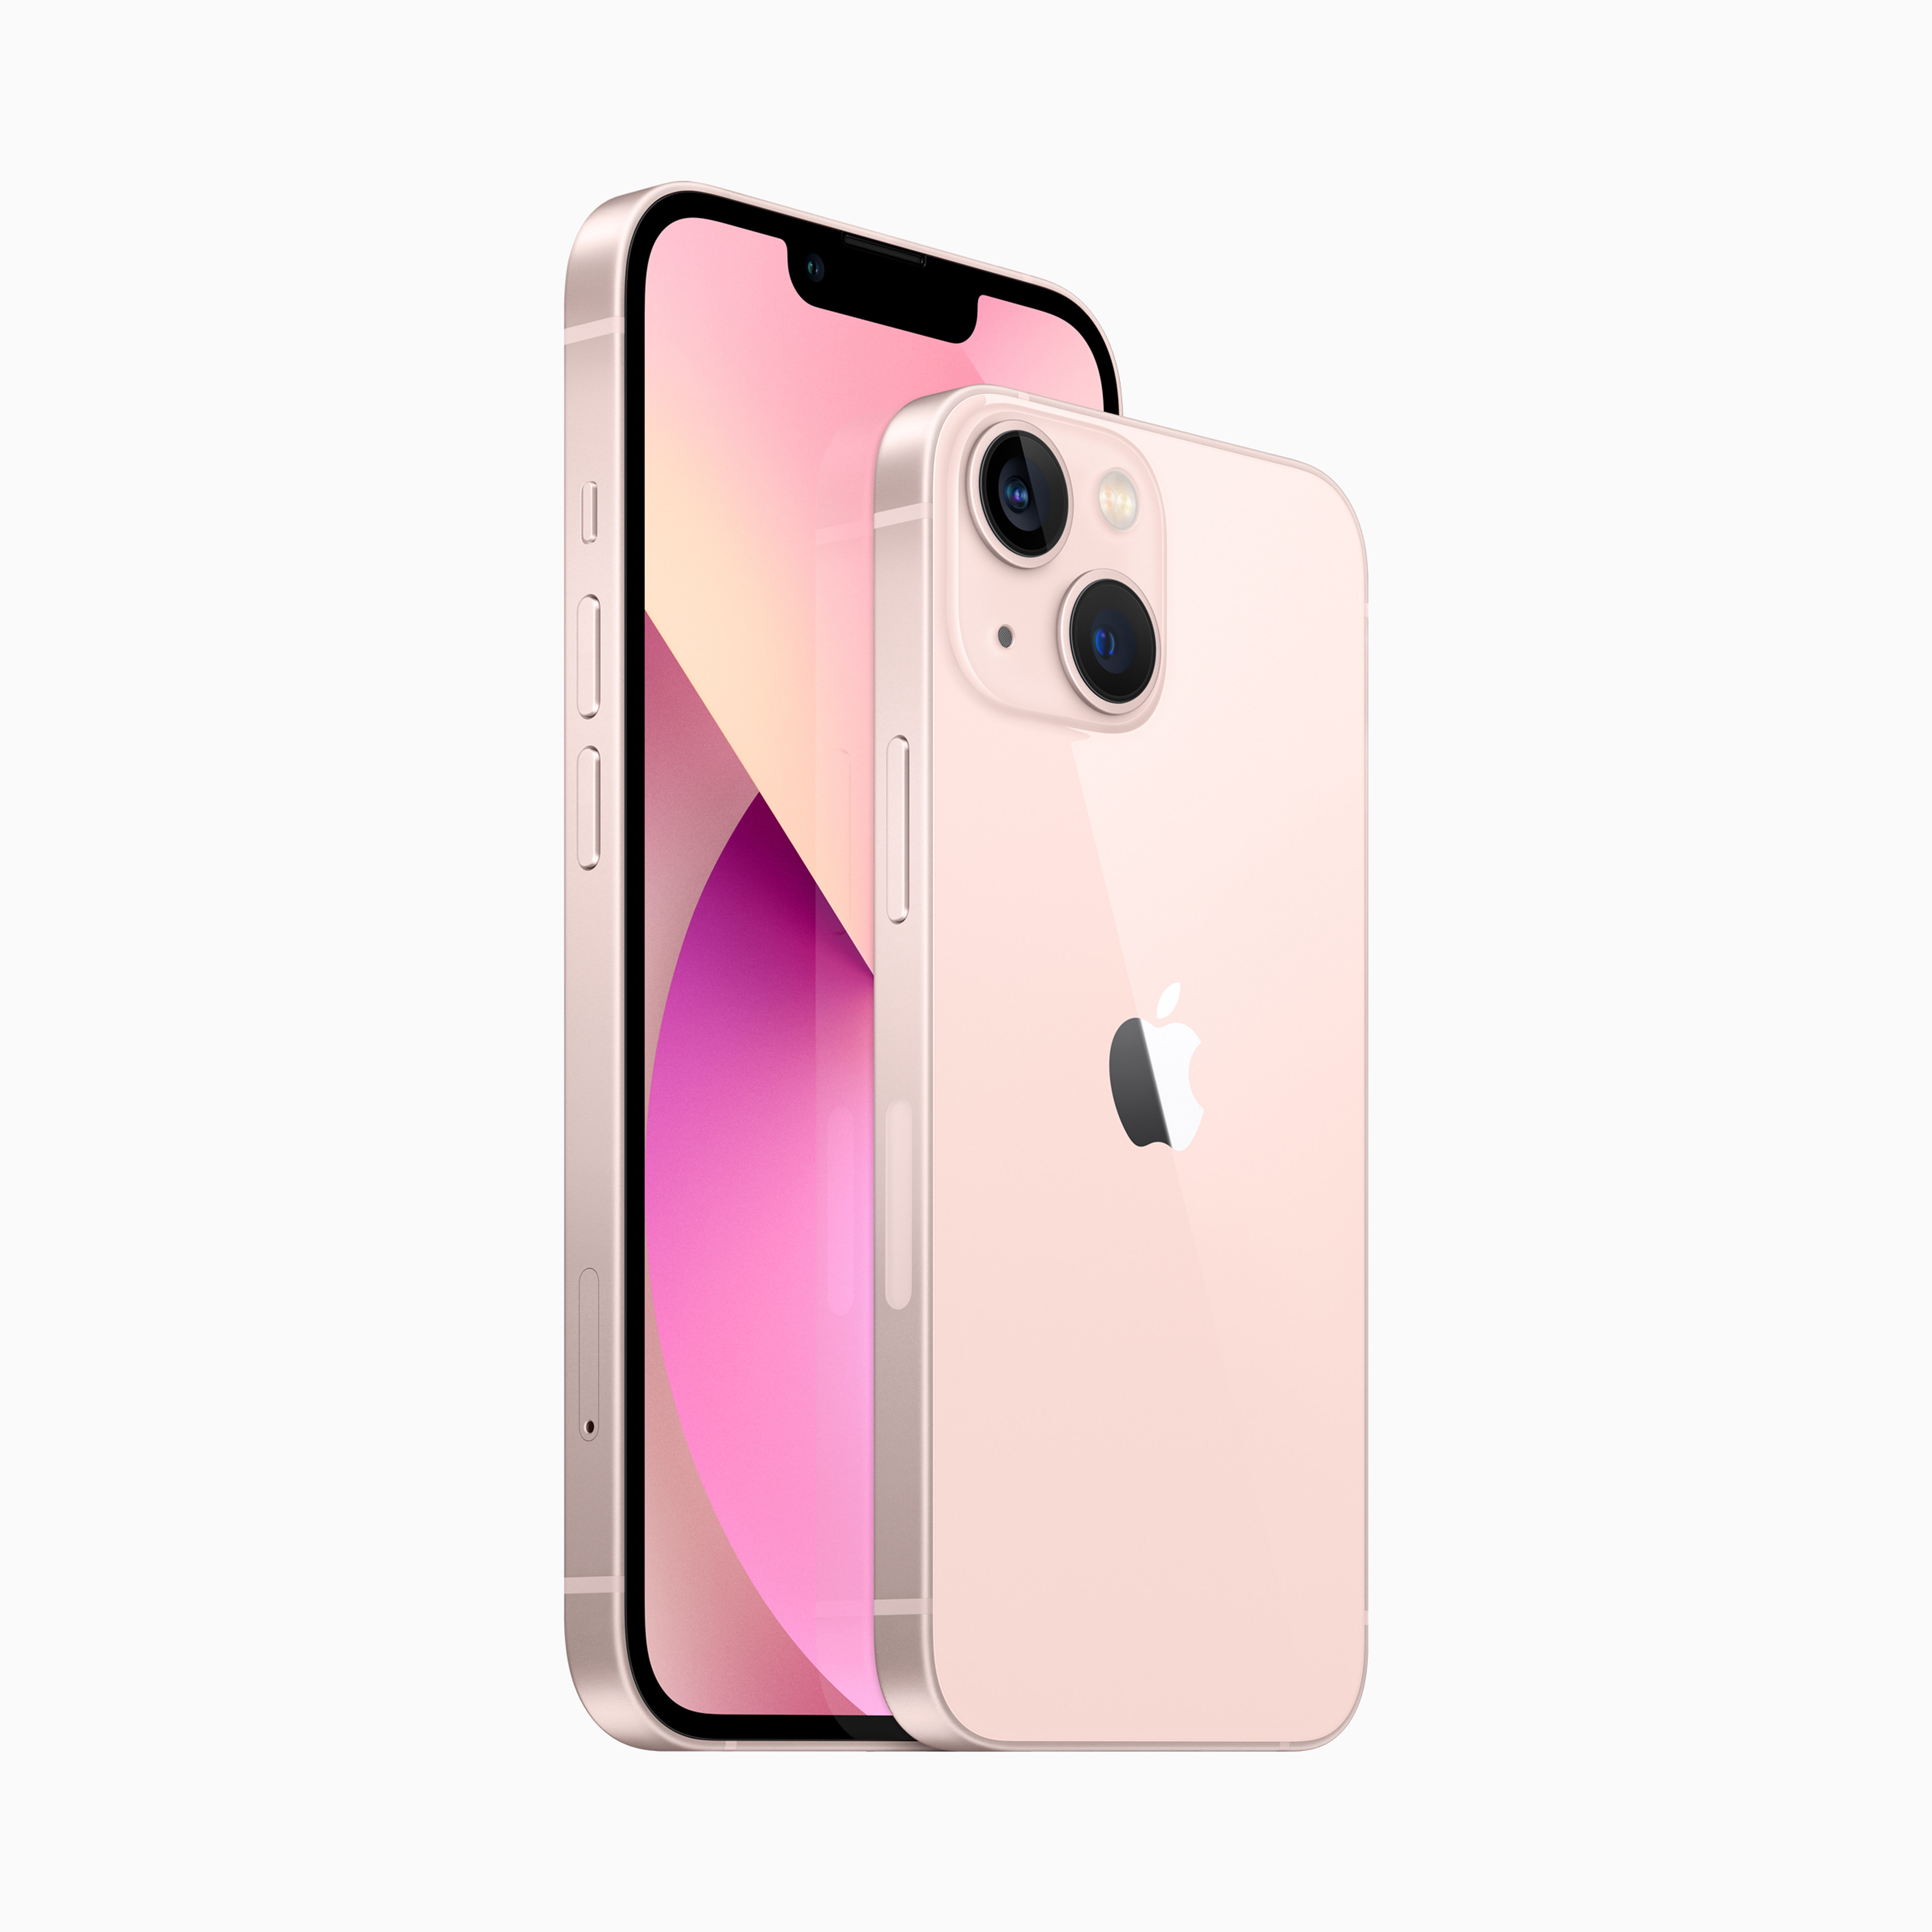 Max pre 13 pro order iphone How to